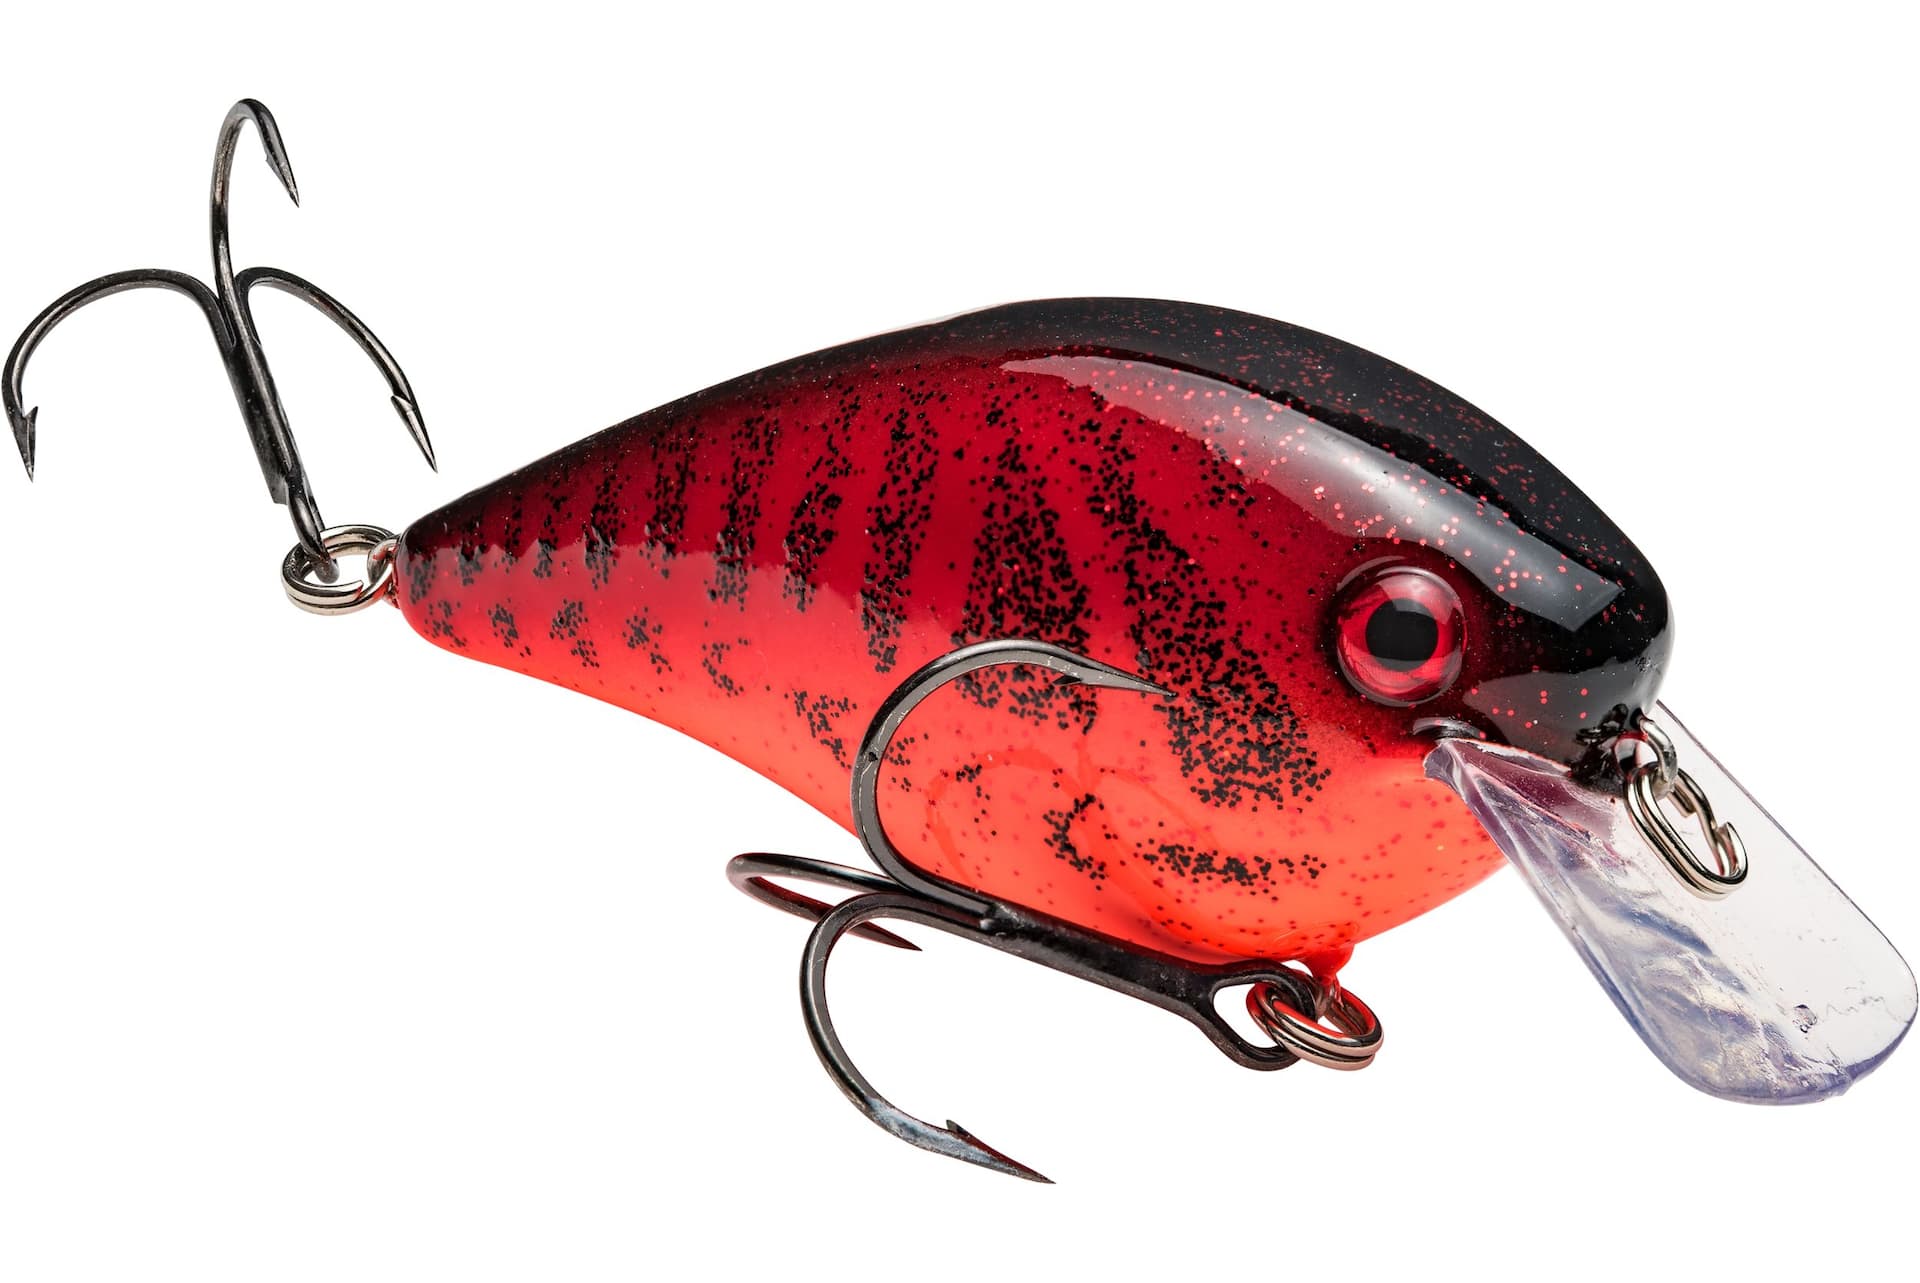 Master Crankbait Fishing With the Right Setup and Positioning 